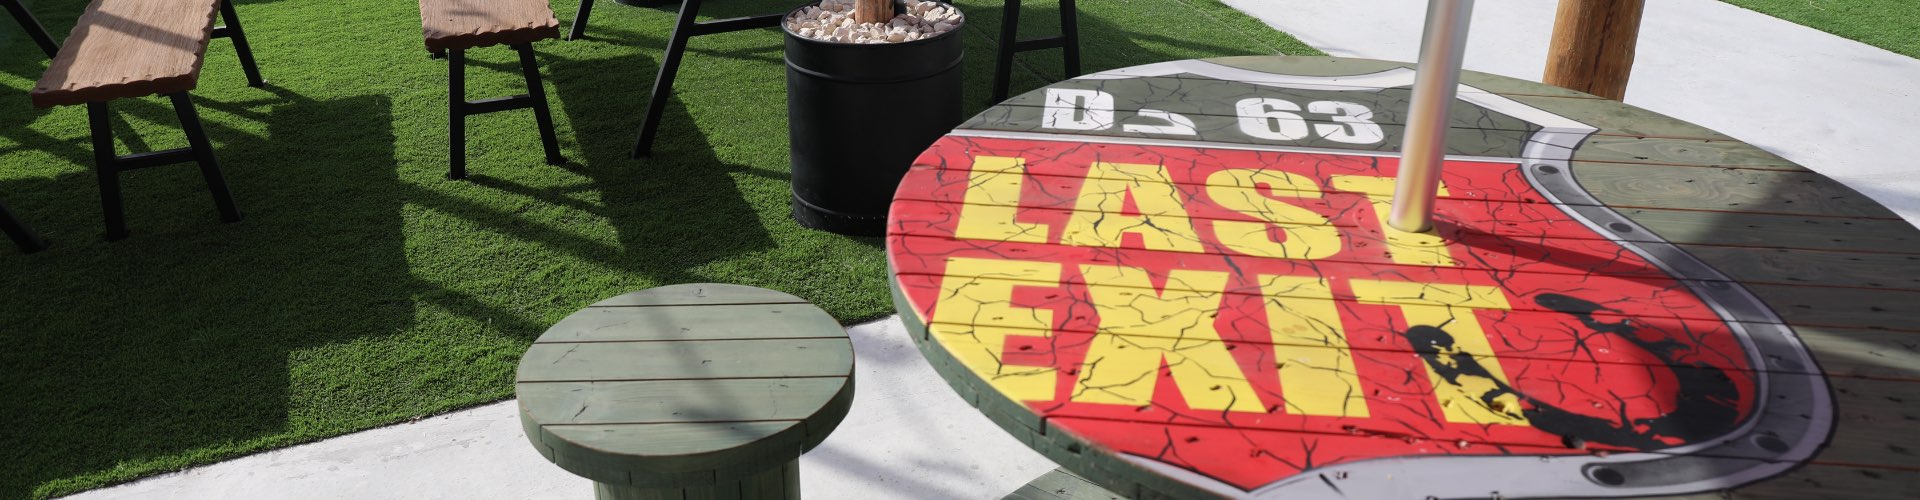 last exit logo on wooden table 